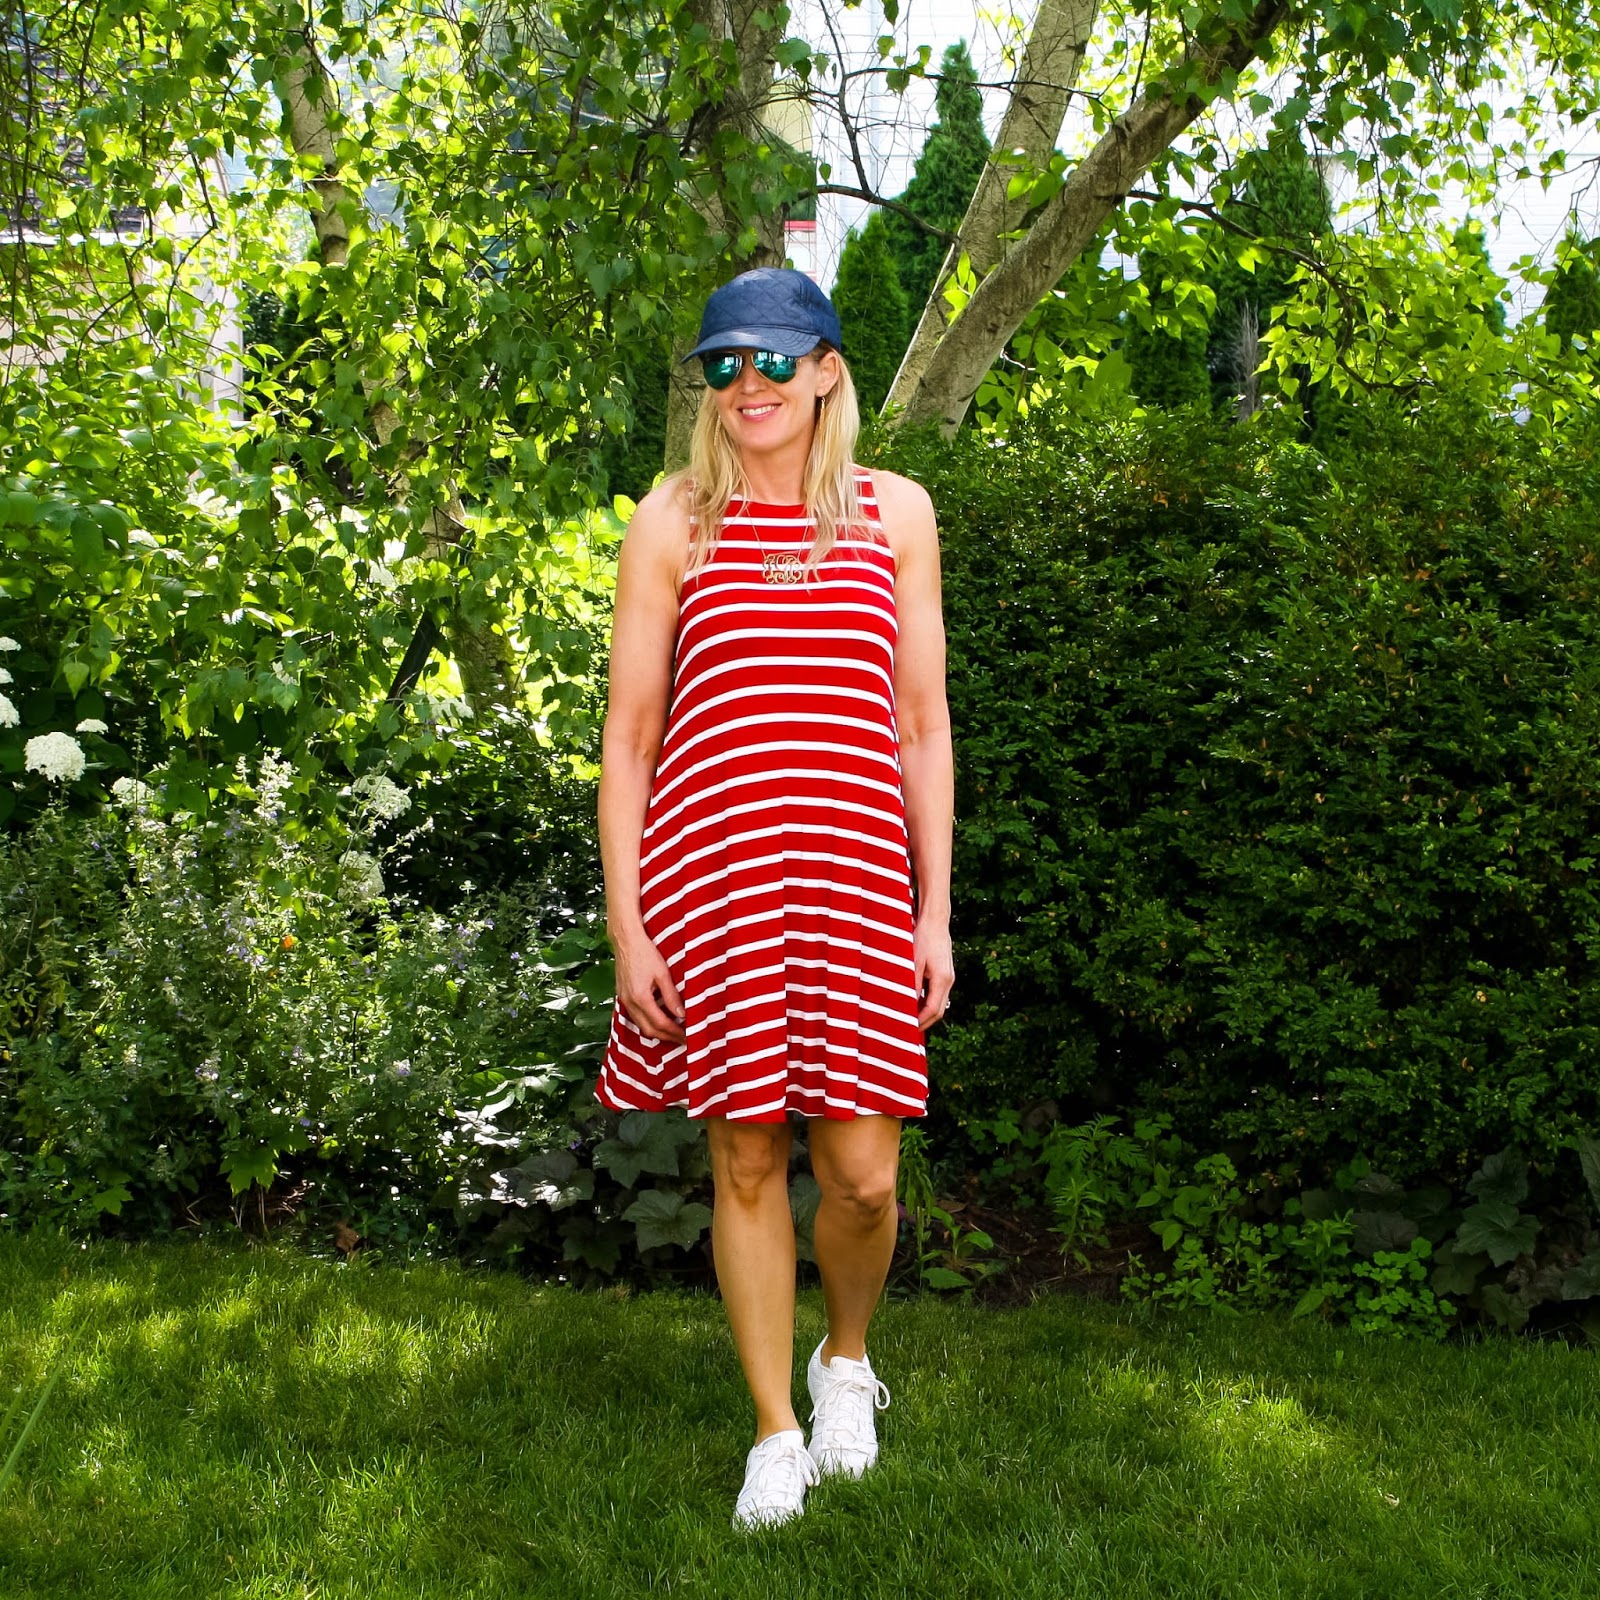 red striped dress, baseball hat and sneakers